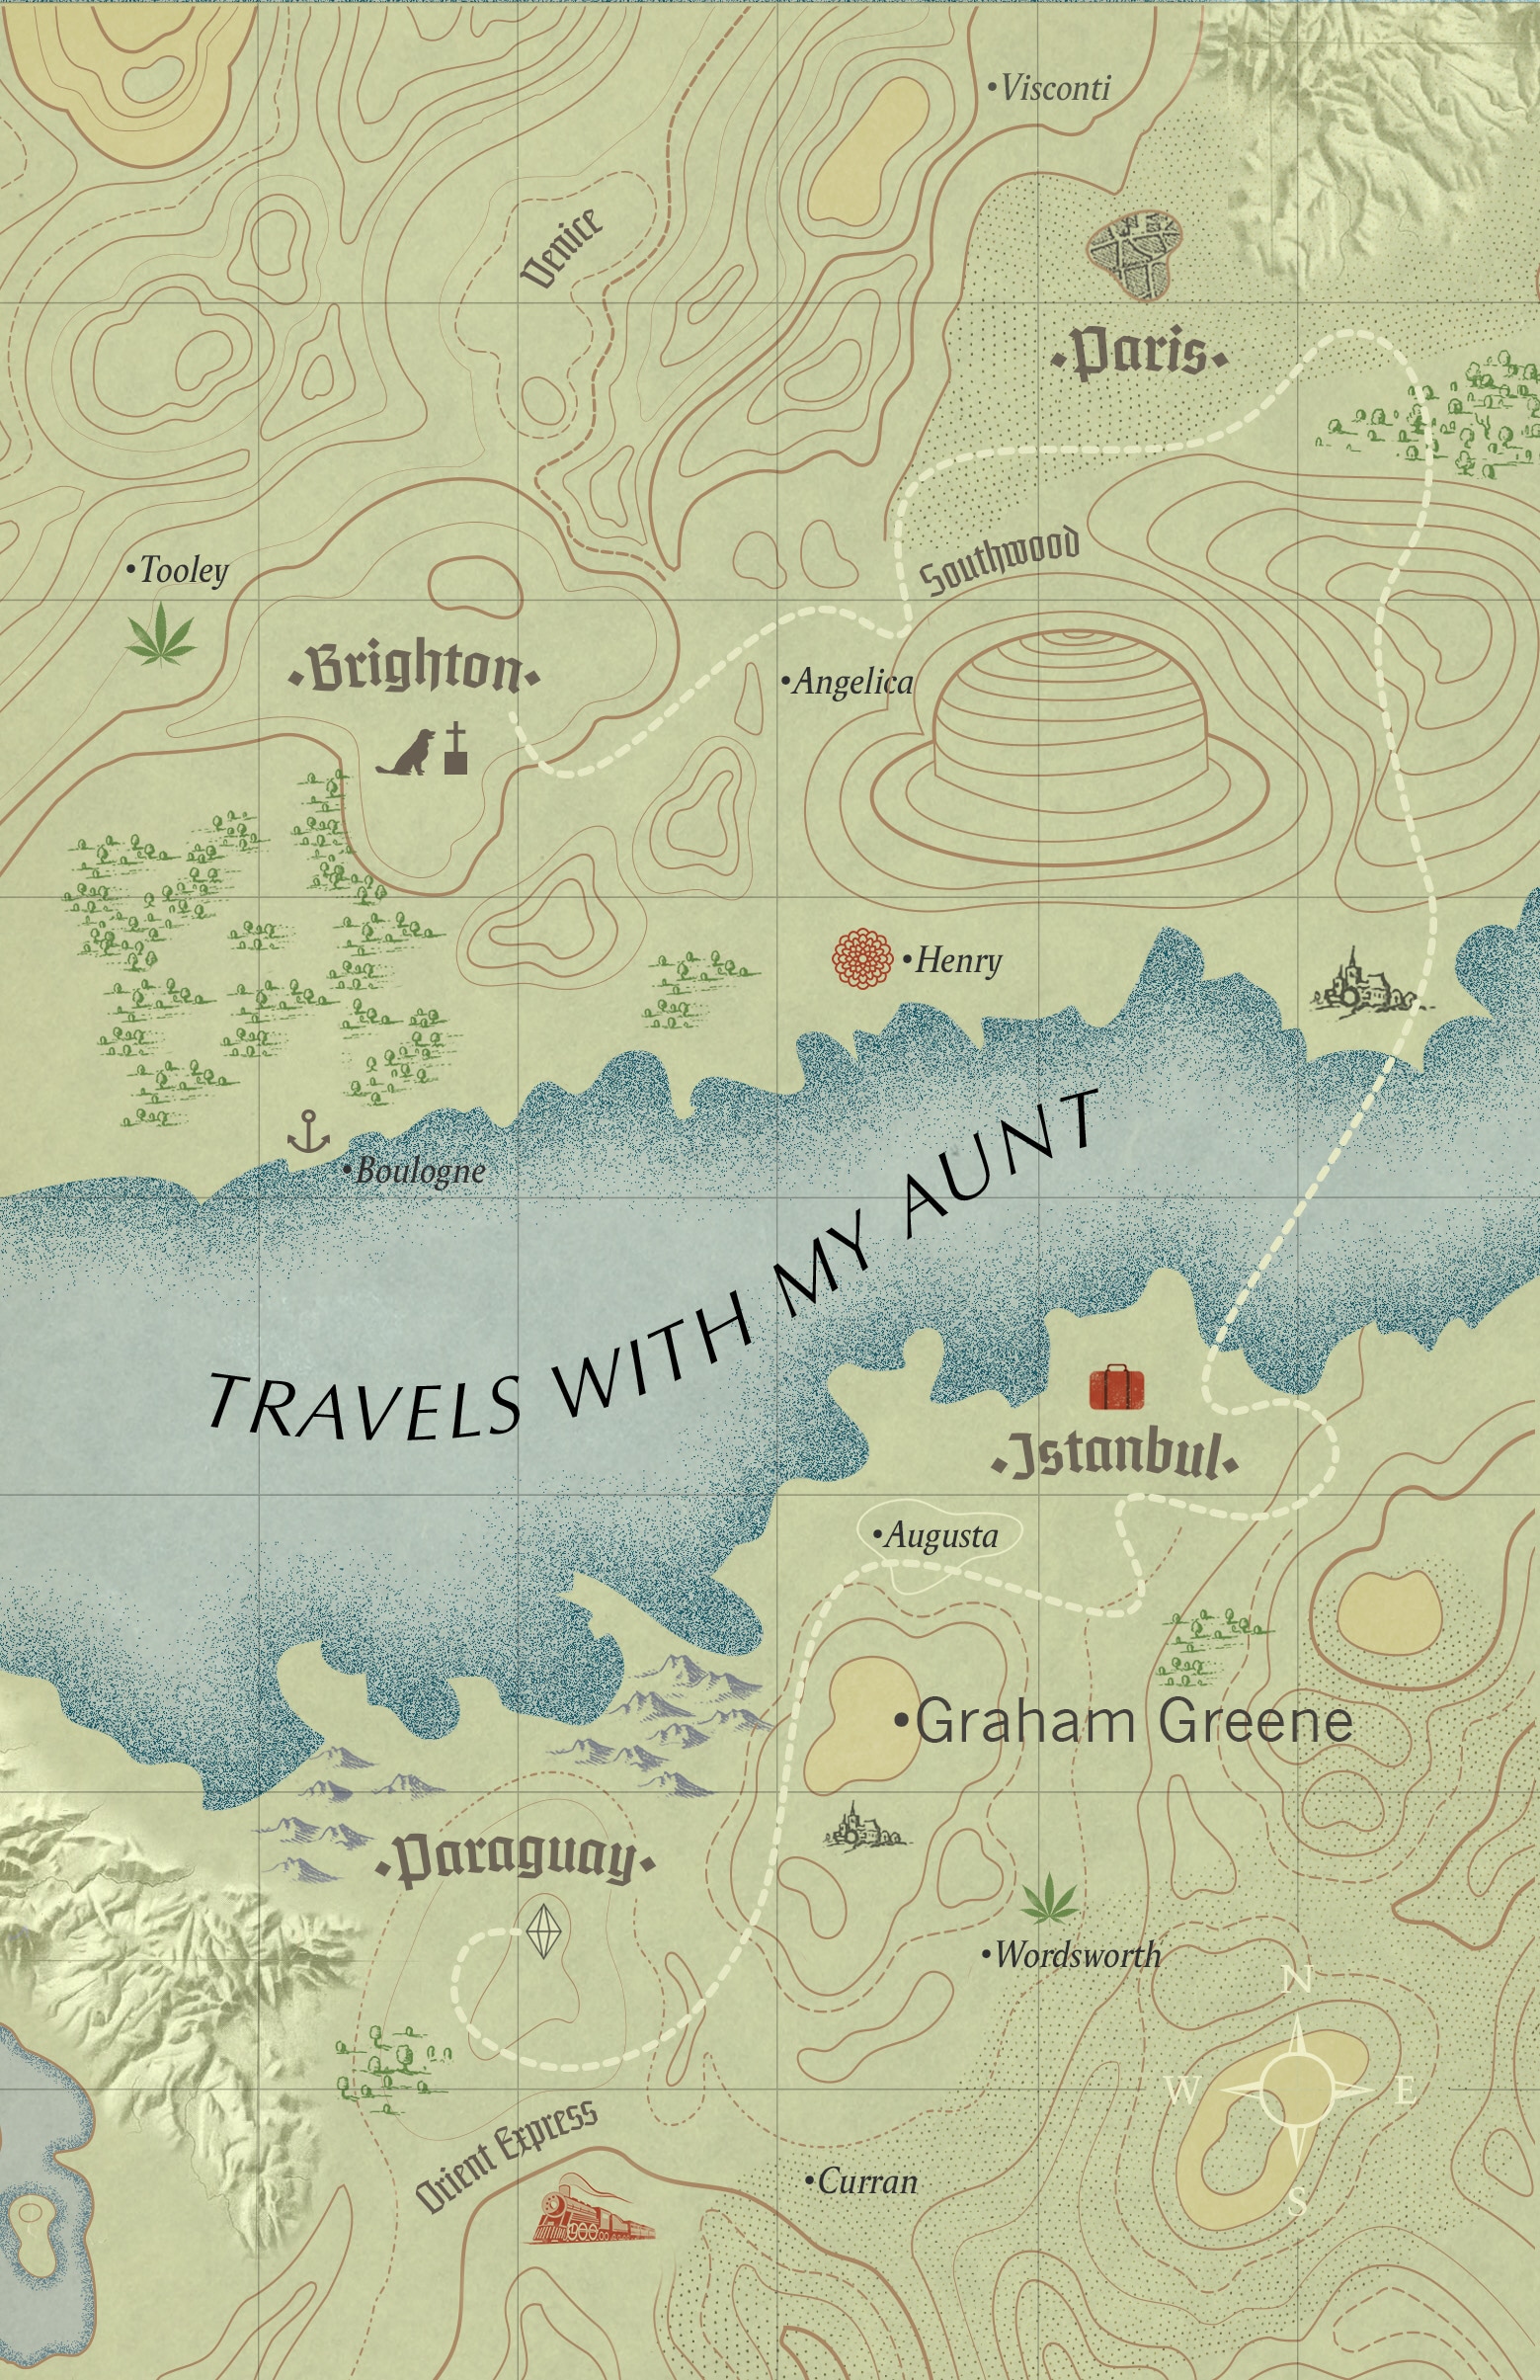 Book “Travels With My Aunt” by Graham Greene — June 6, 2019